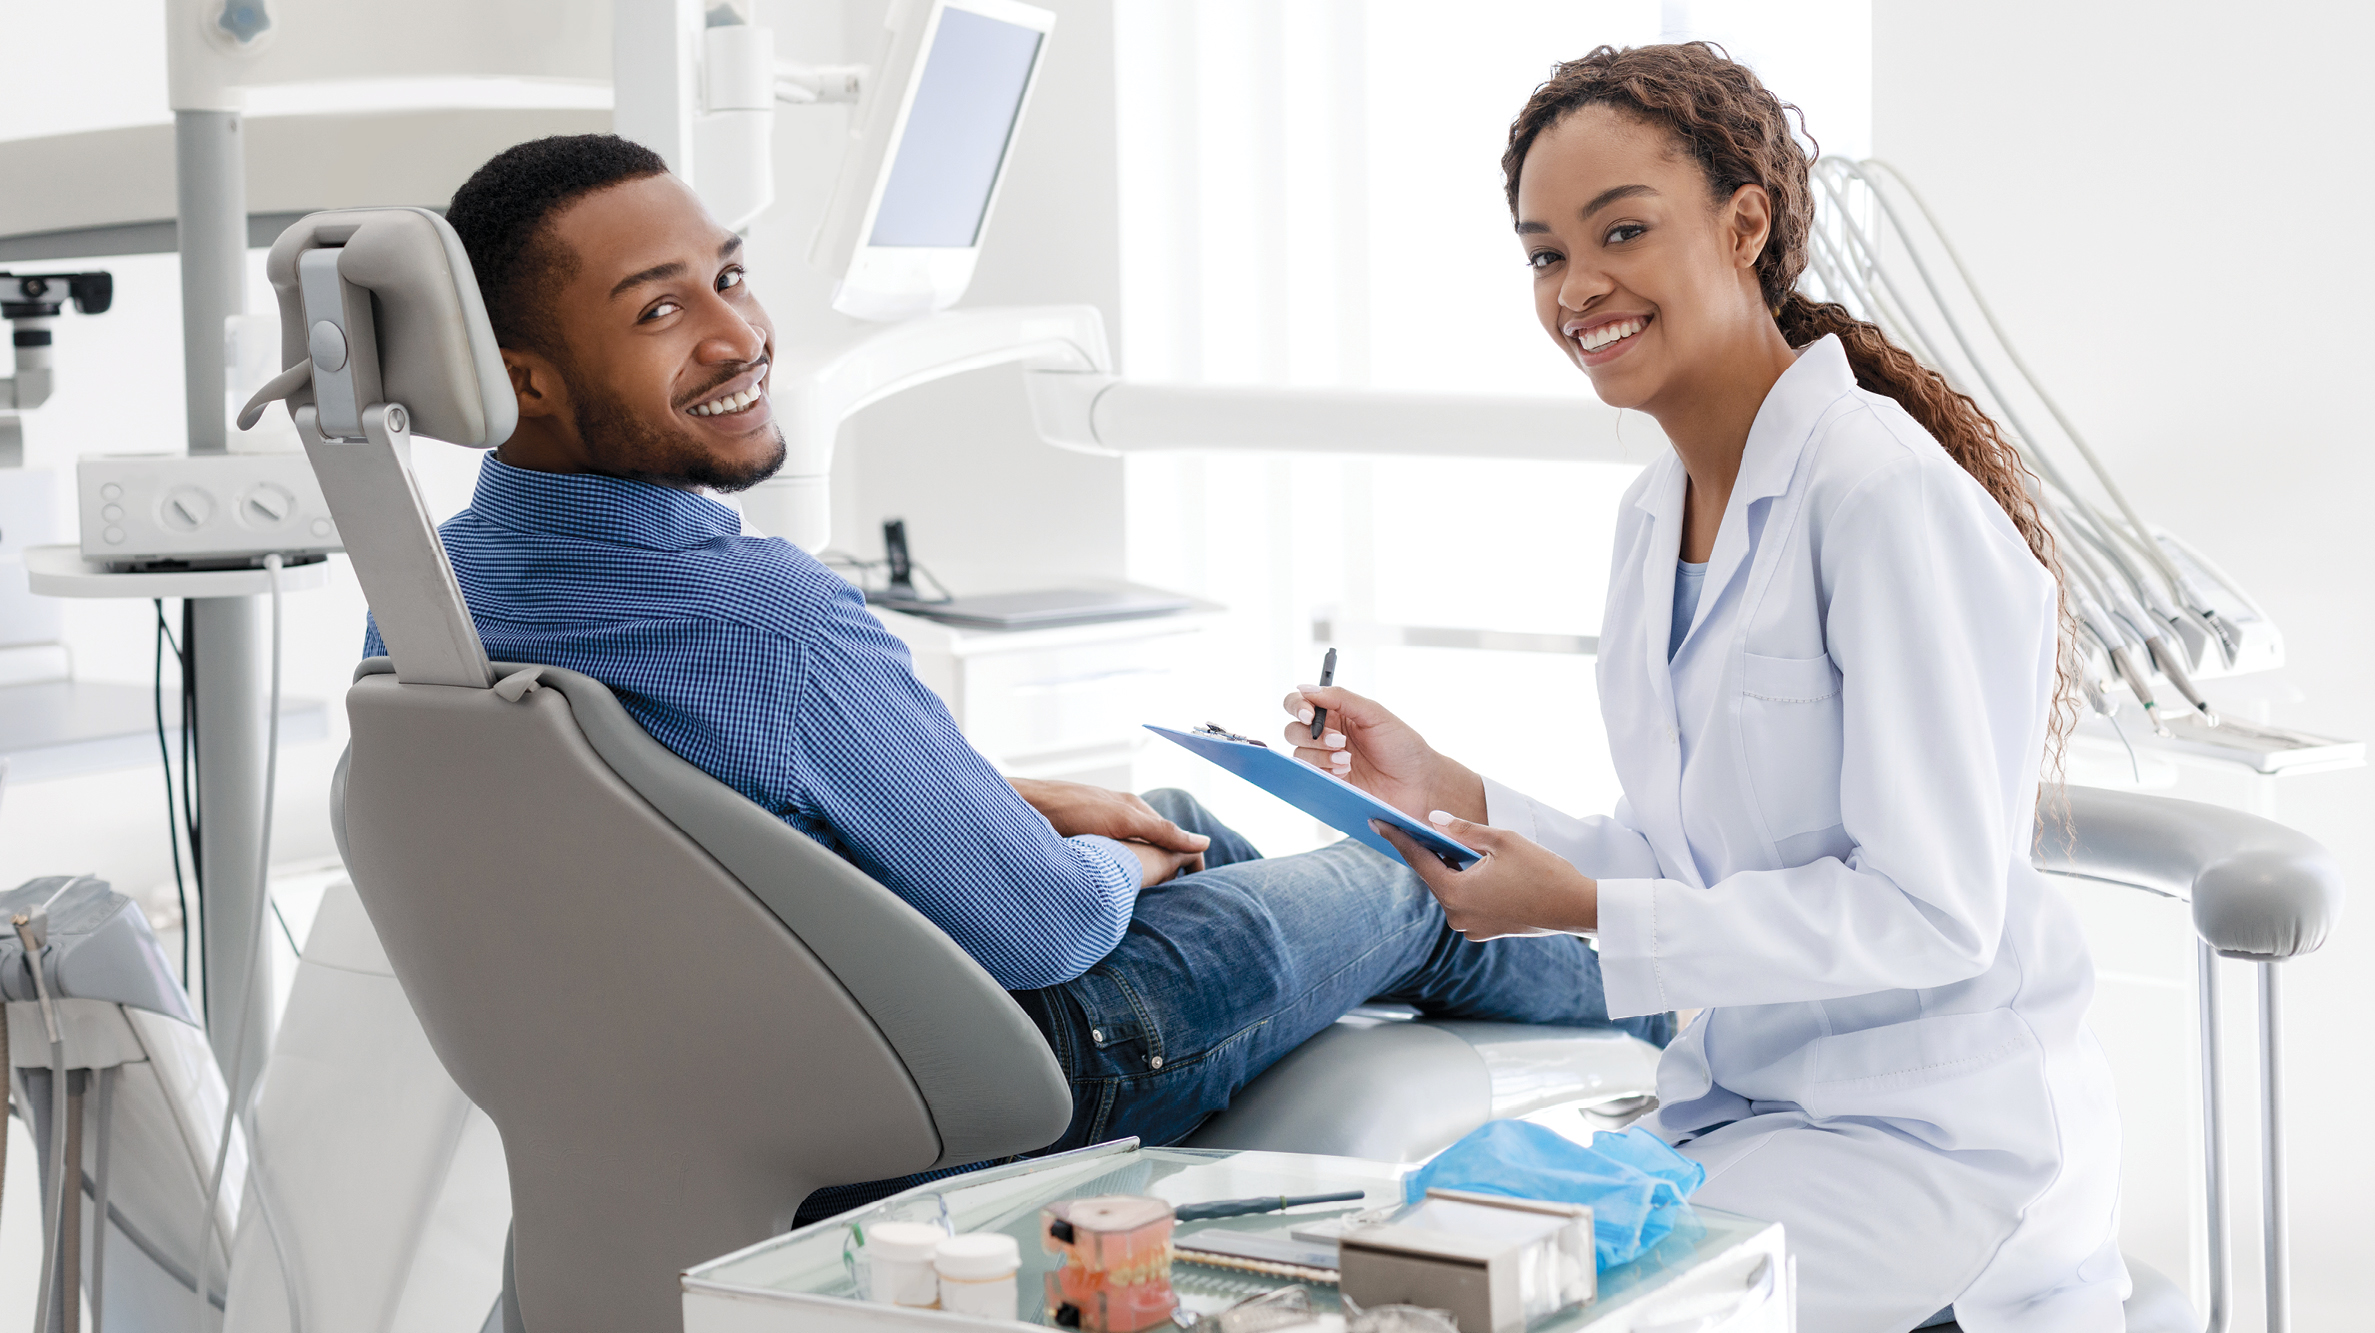 A dentist and a patient smiling during a dental treatment